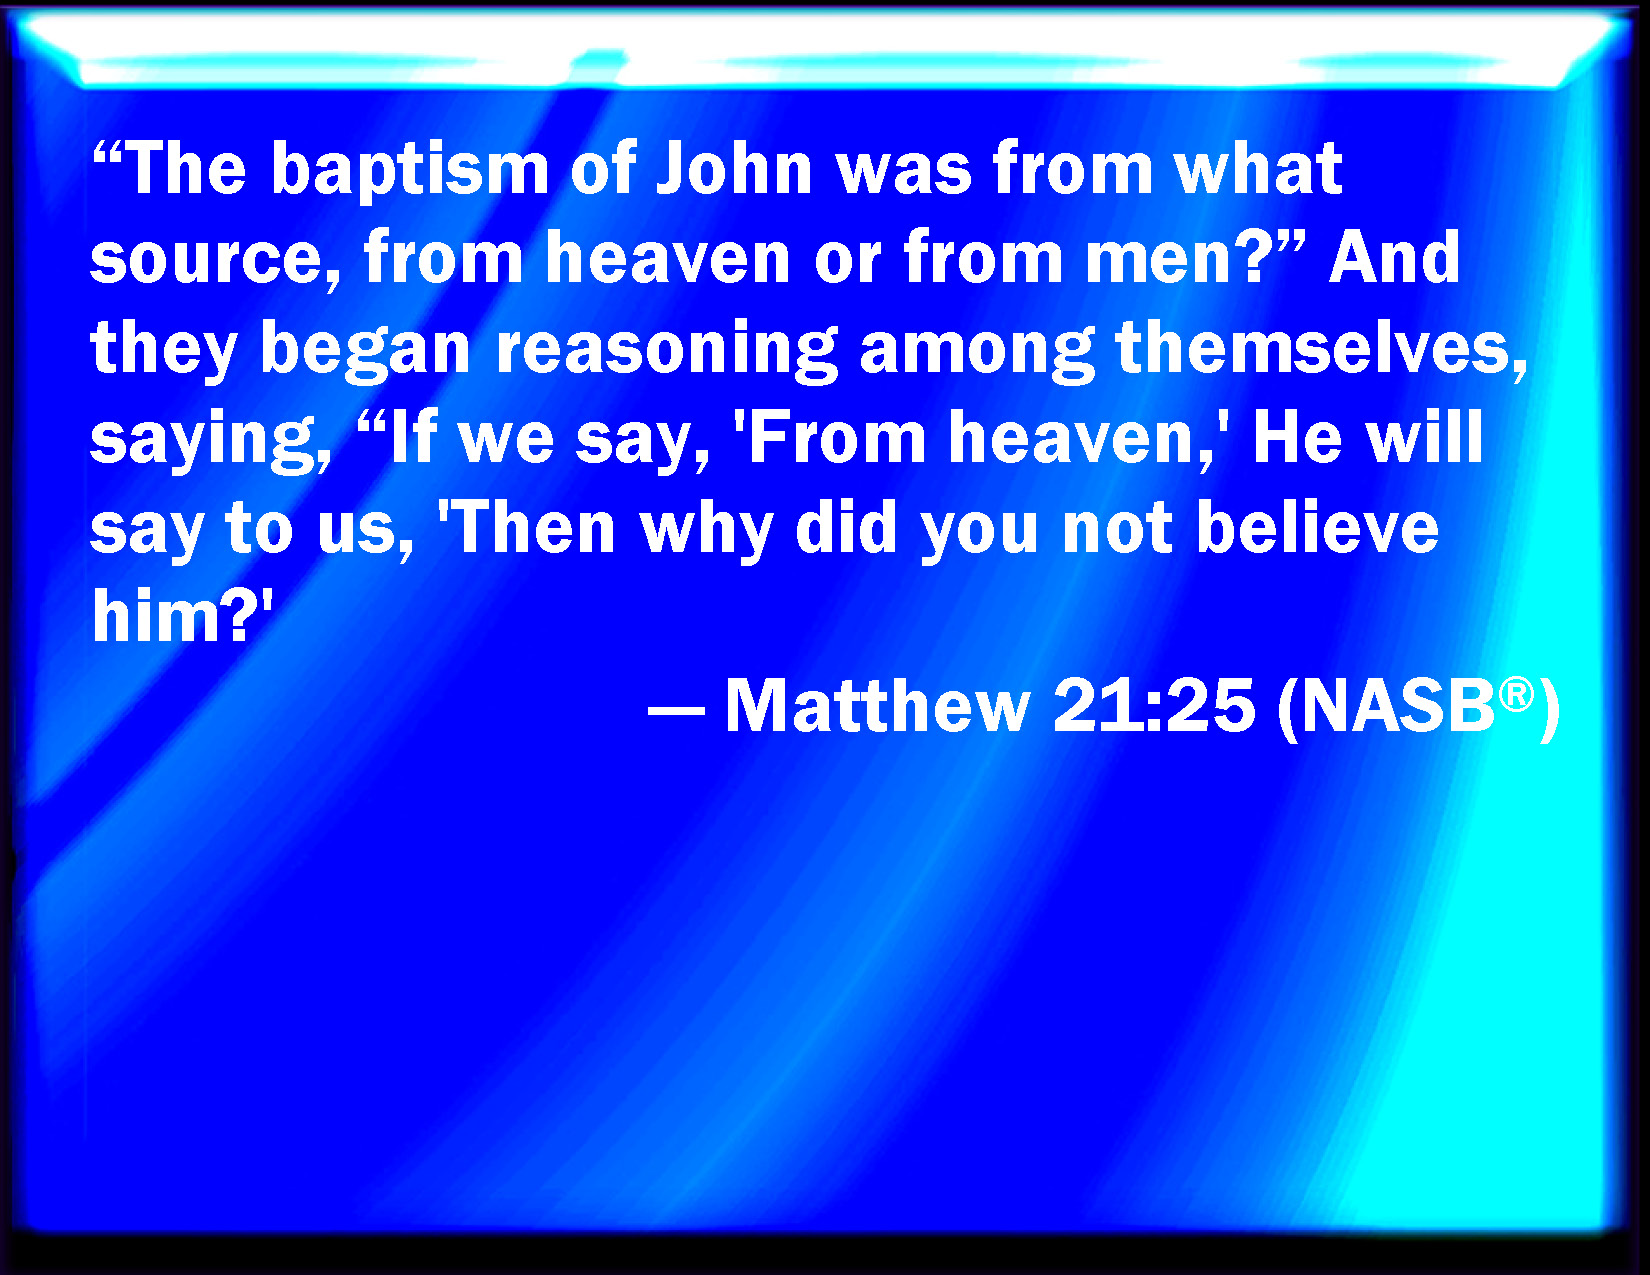 Matthew 21:25 The baptism of John, from where was it? from heaven, or